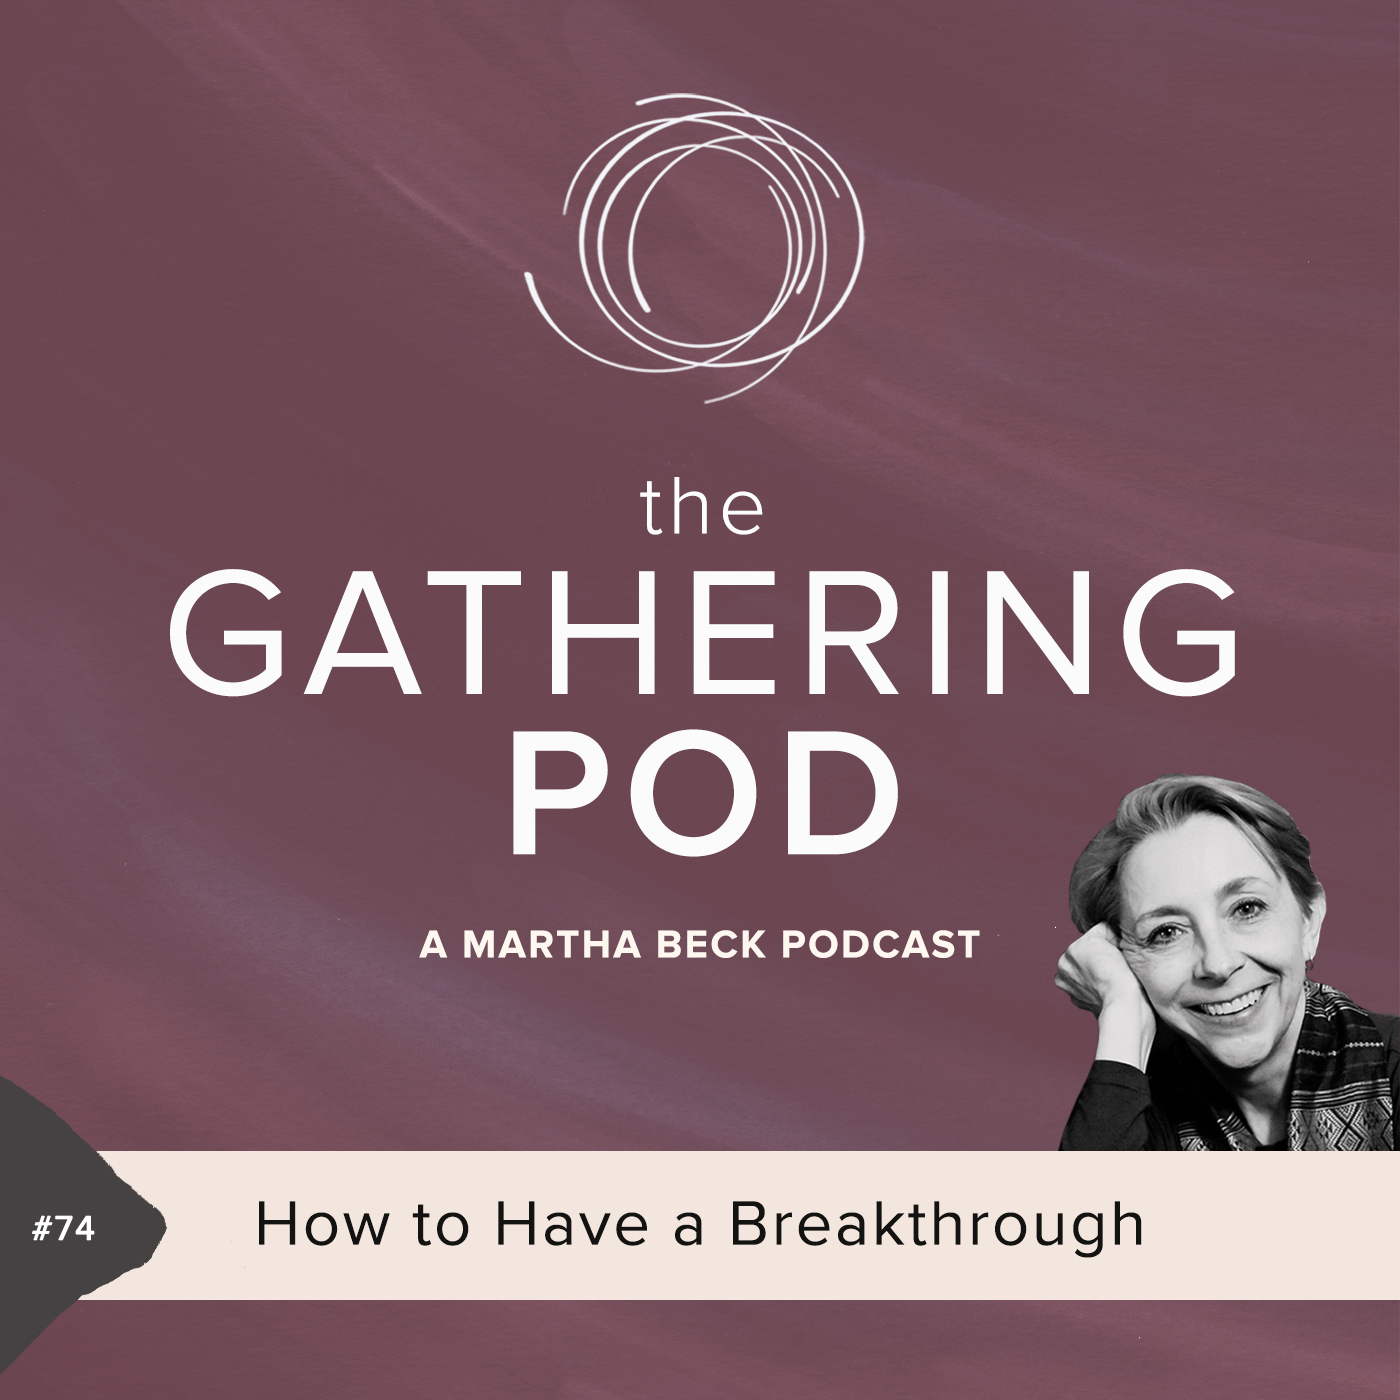 Image for The Gathering Pod A Martha Beck Podcast Episode #74 How to Have a Breakthrough